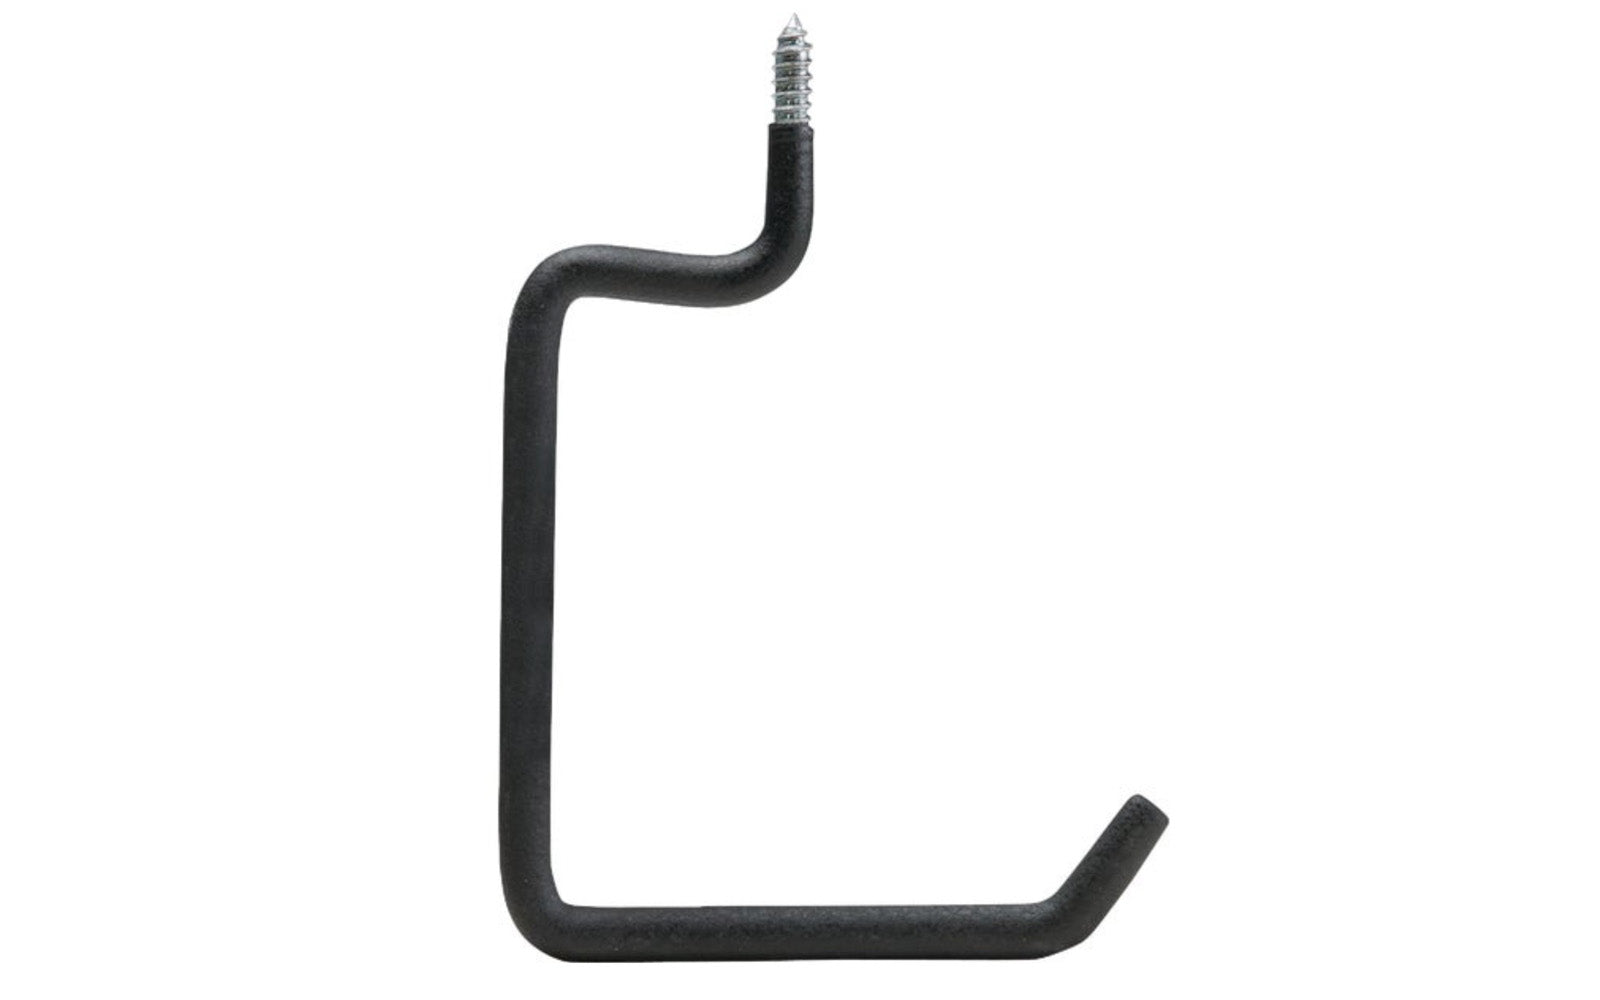 Heavy Duty Vinyl Coated Utility Hanger. This heavy-duty storage hanger is designed to hold up to 50 lbs. Hanger has no-mar vinyl coating. Great for hanging items in shop or garage. 009326208862